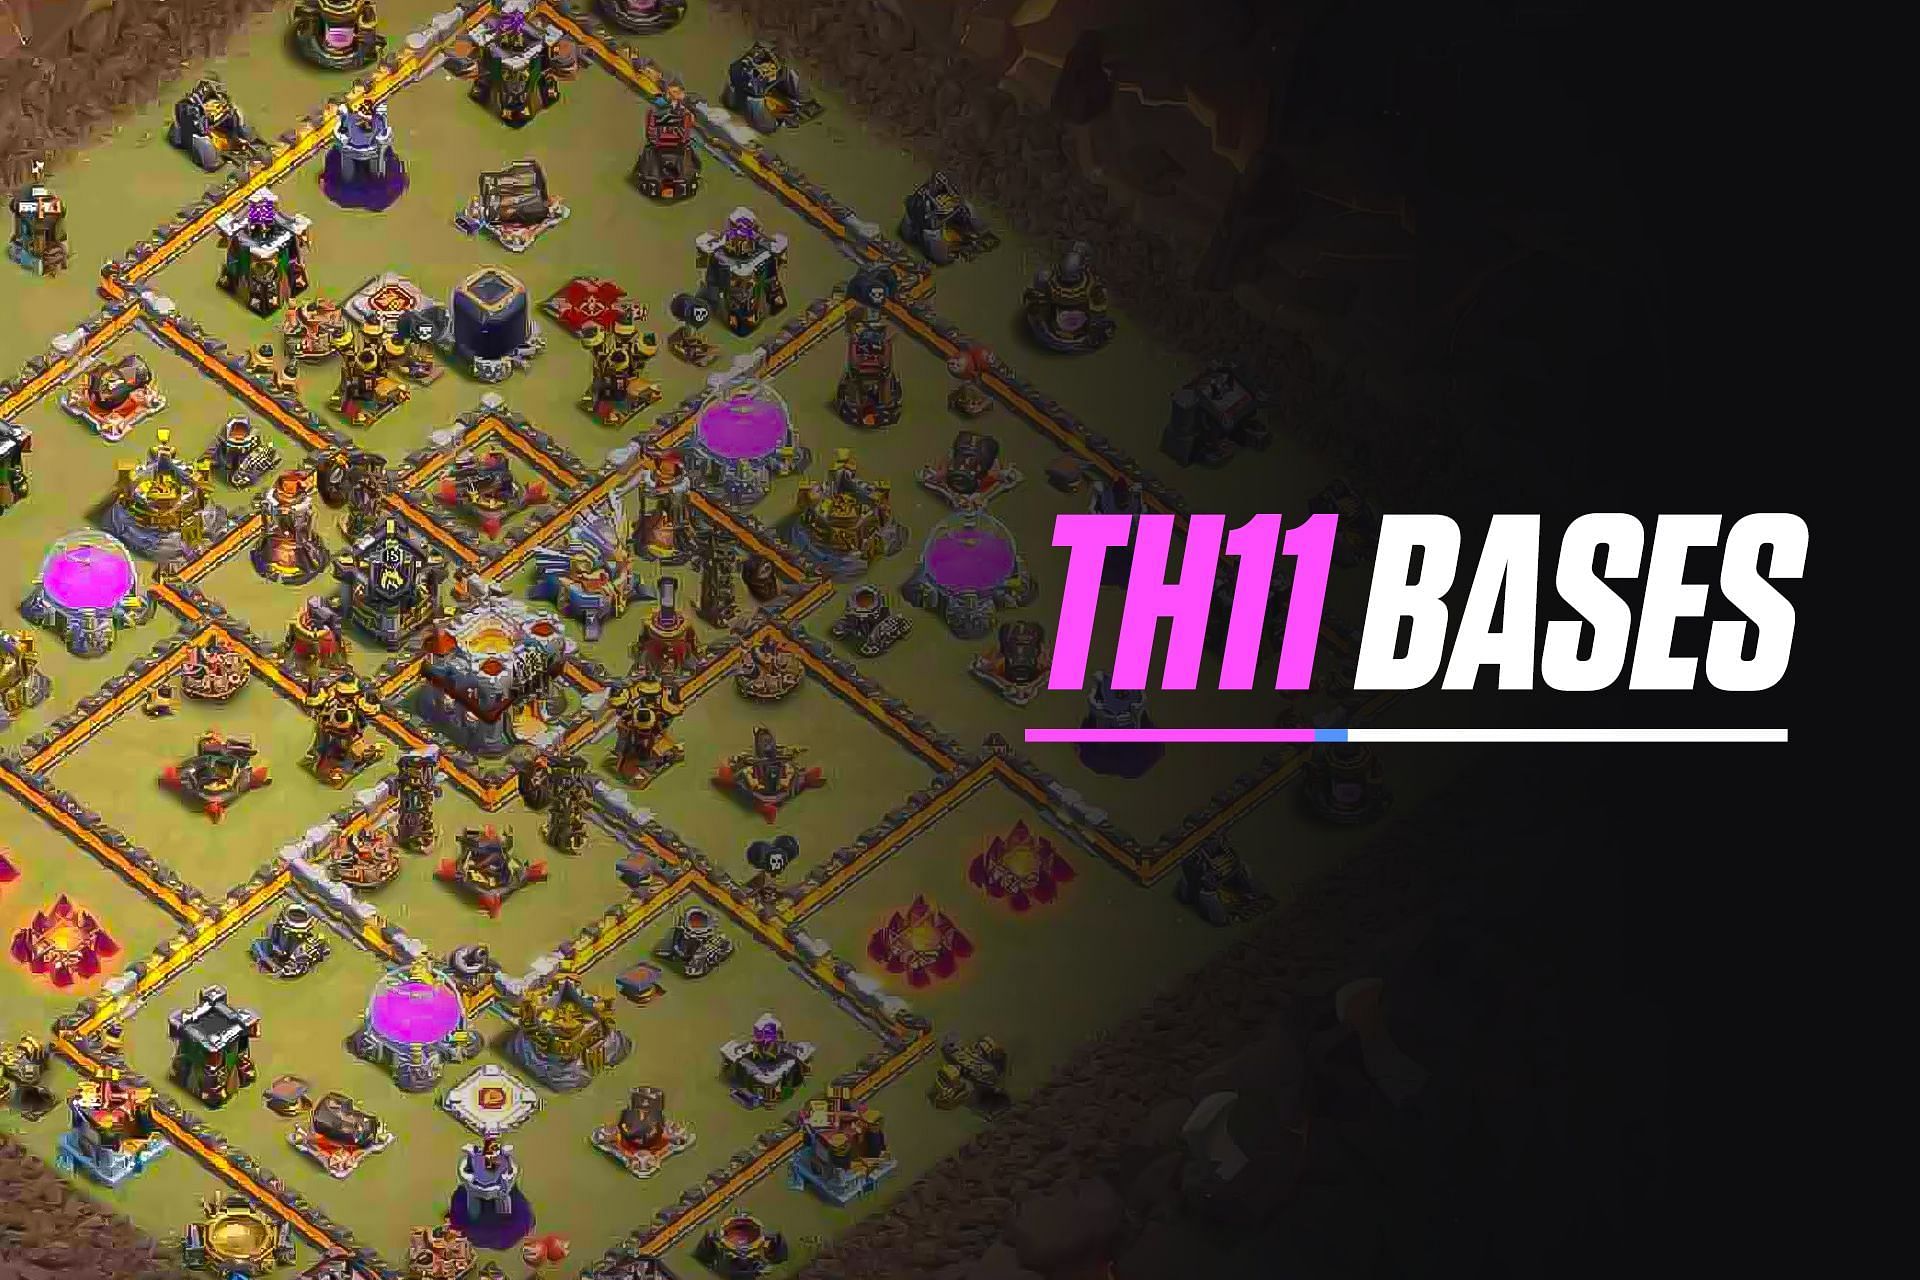 Top 5 Clash of Clans TH11 bases for Clan Wars